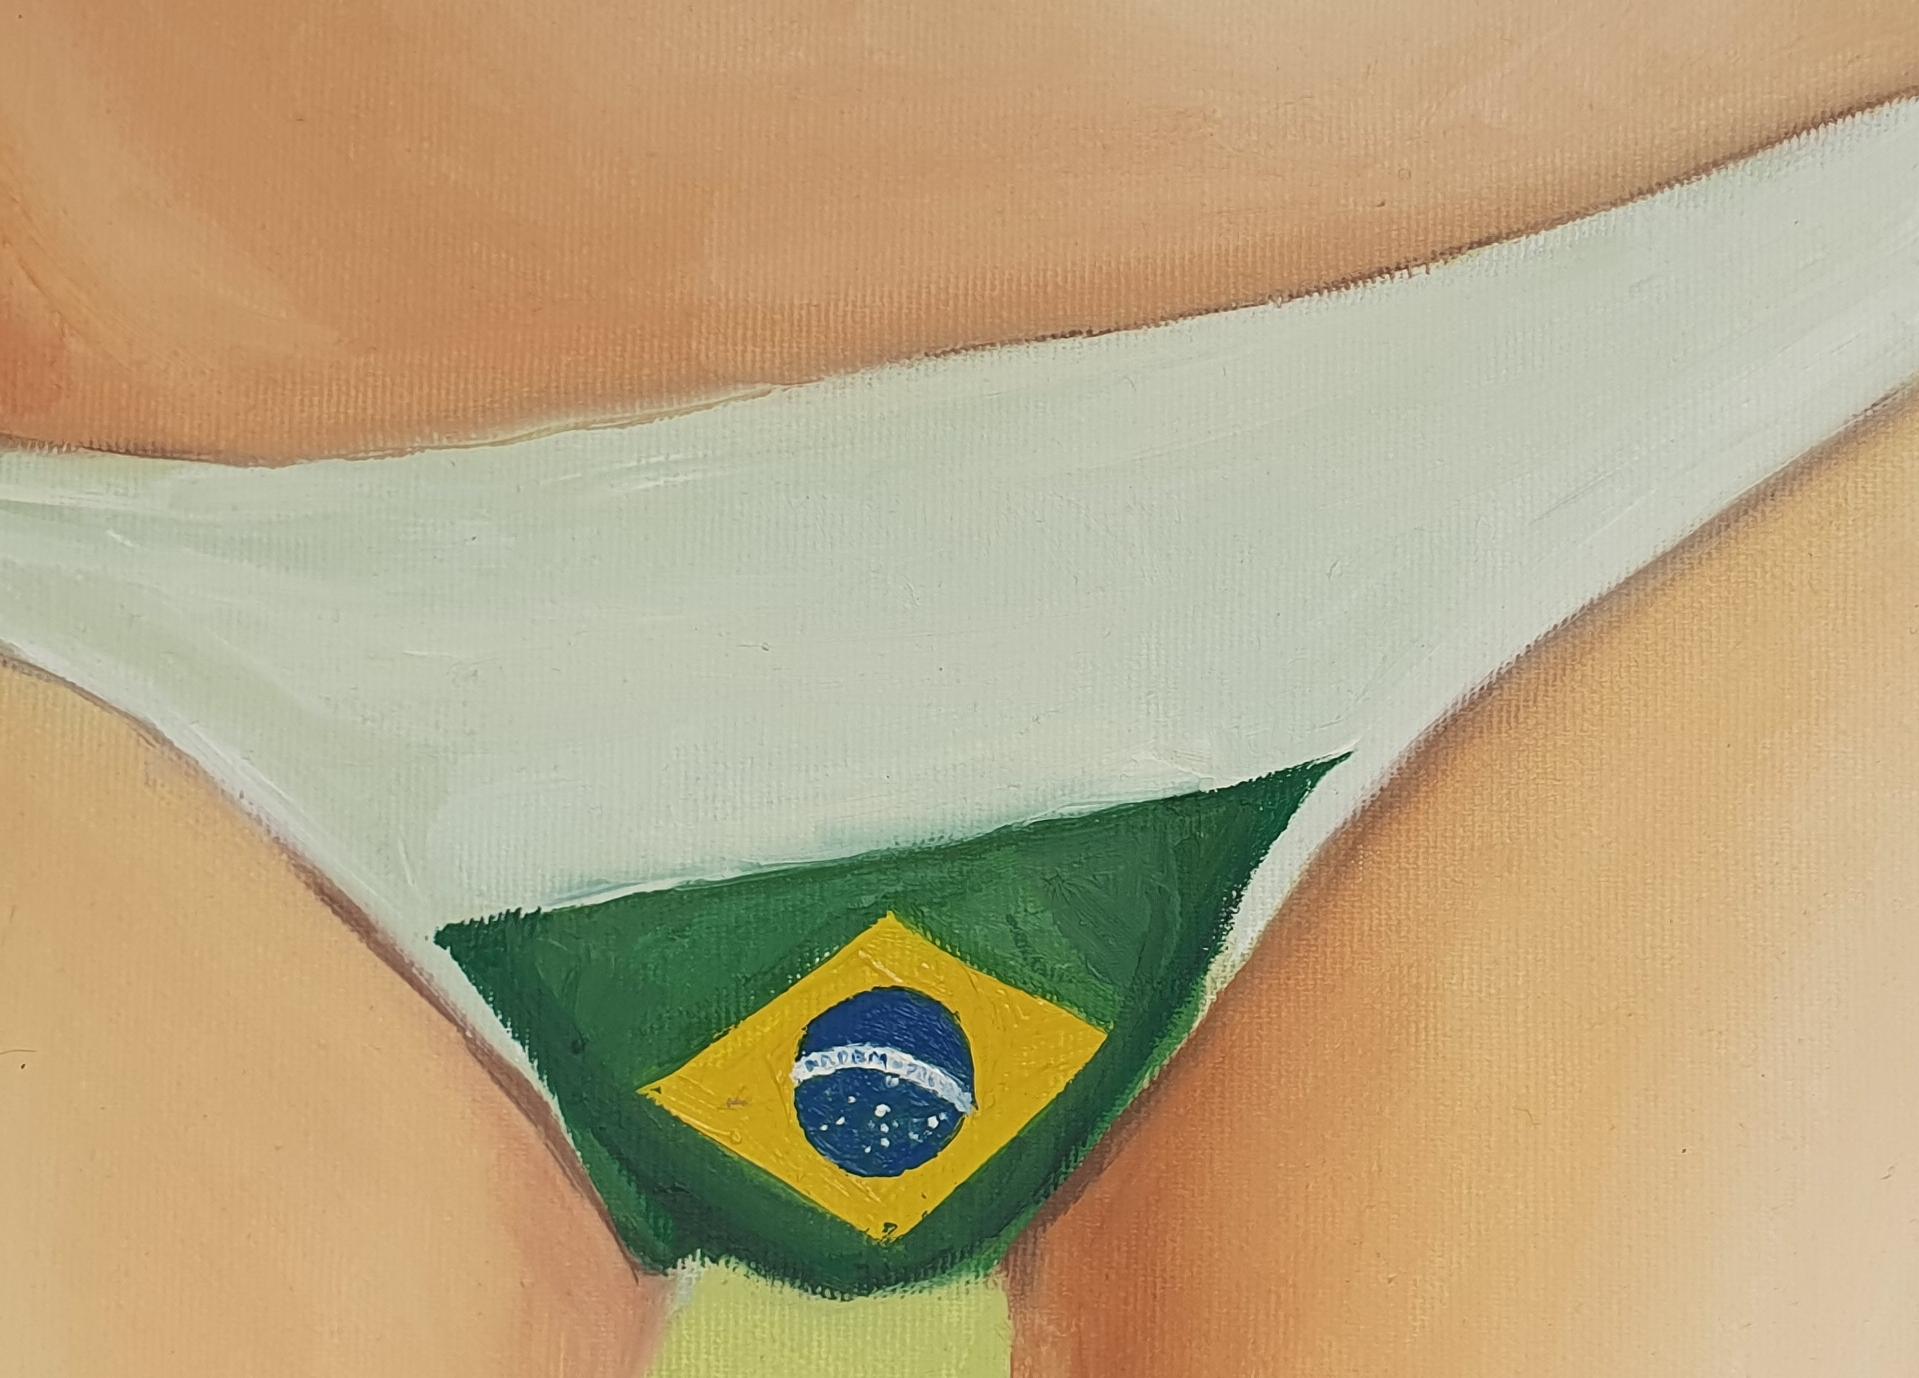 Brazil, 2010
Oil on canvas (Signed, front right middle)
14.96 H x 18.11 W in.
38 H x 46 W cm.

The contemporary society is seen as an 